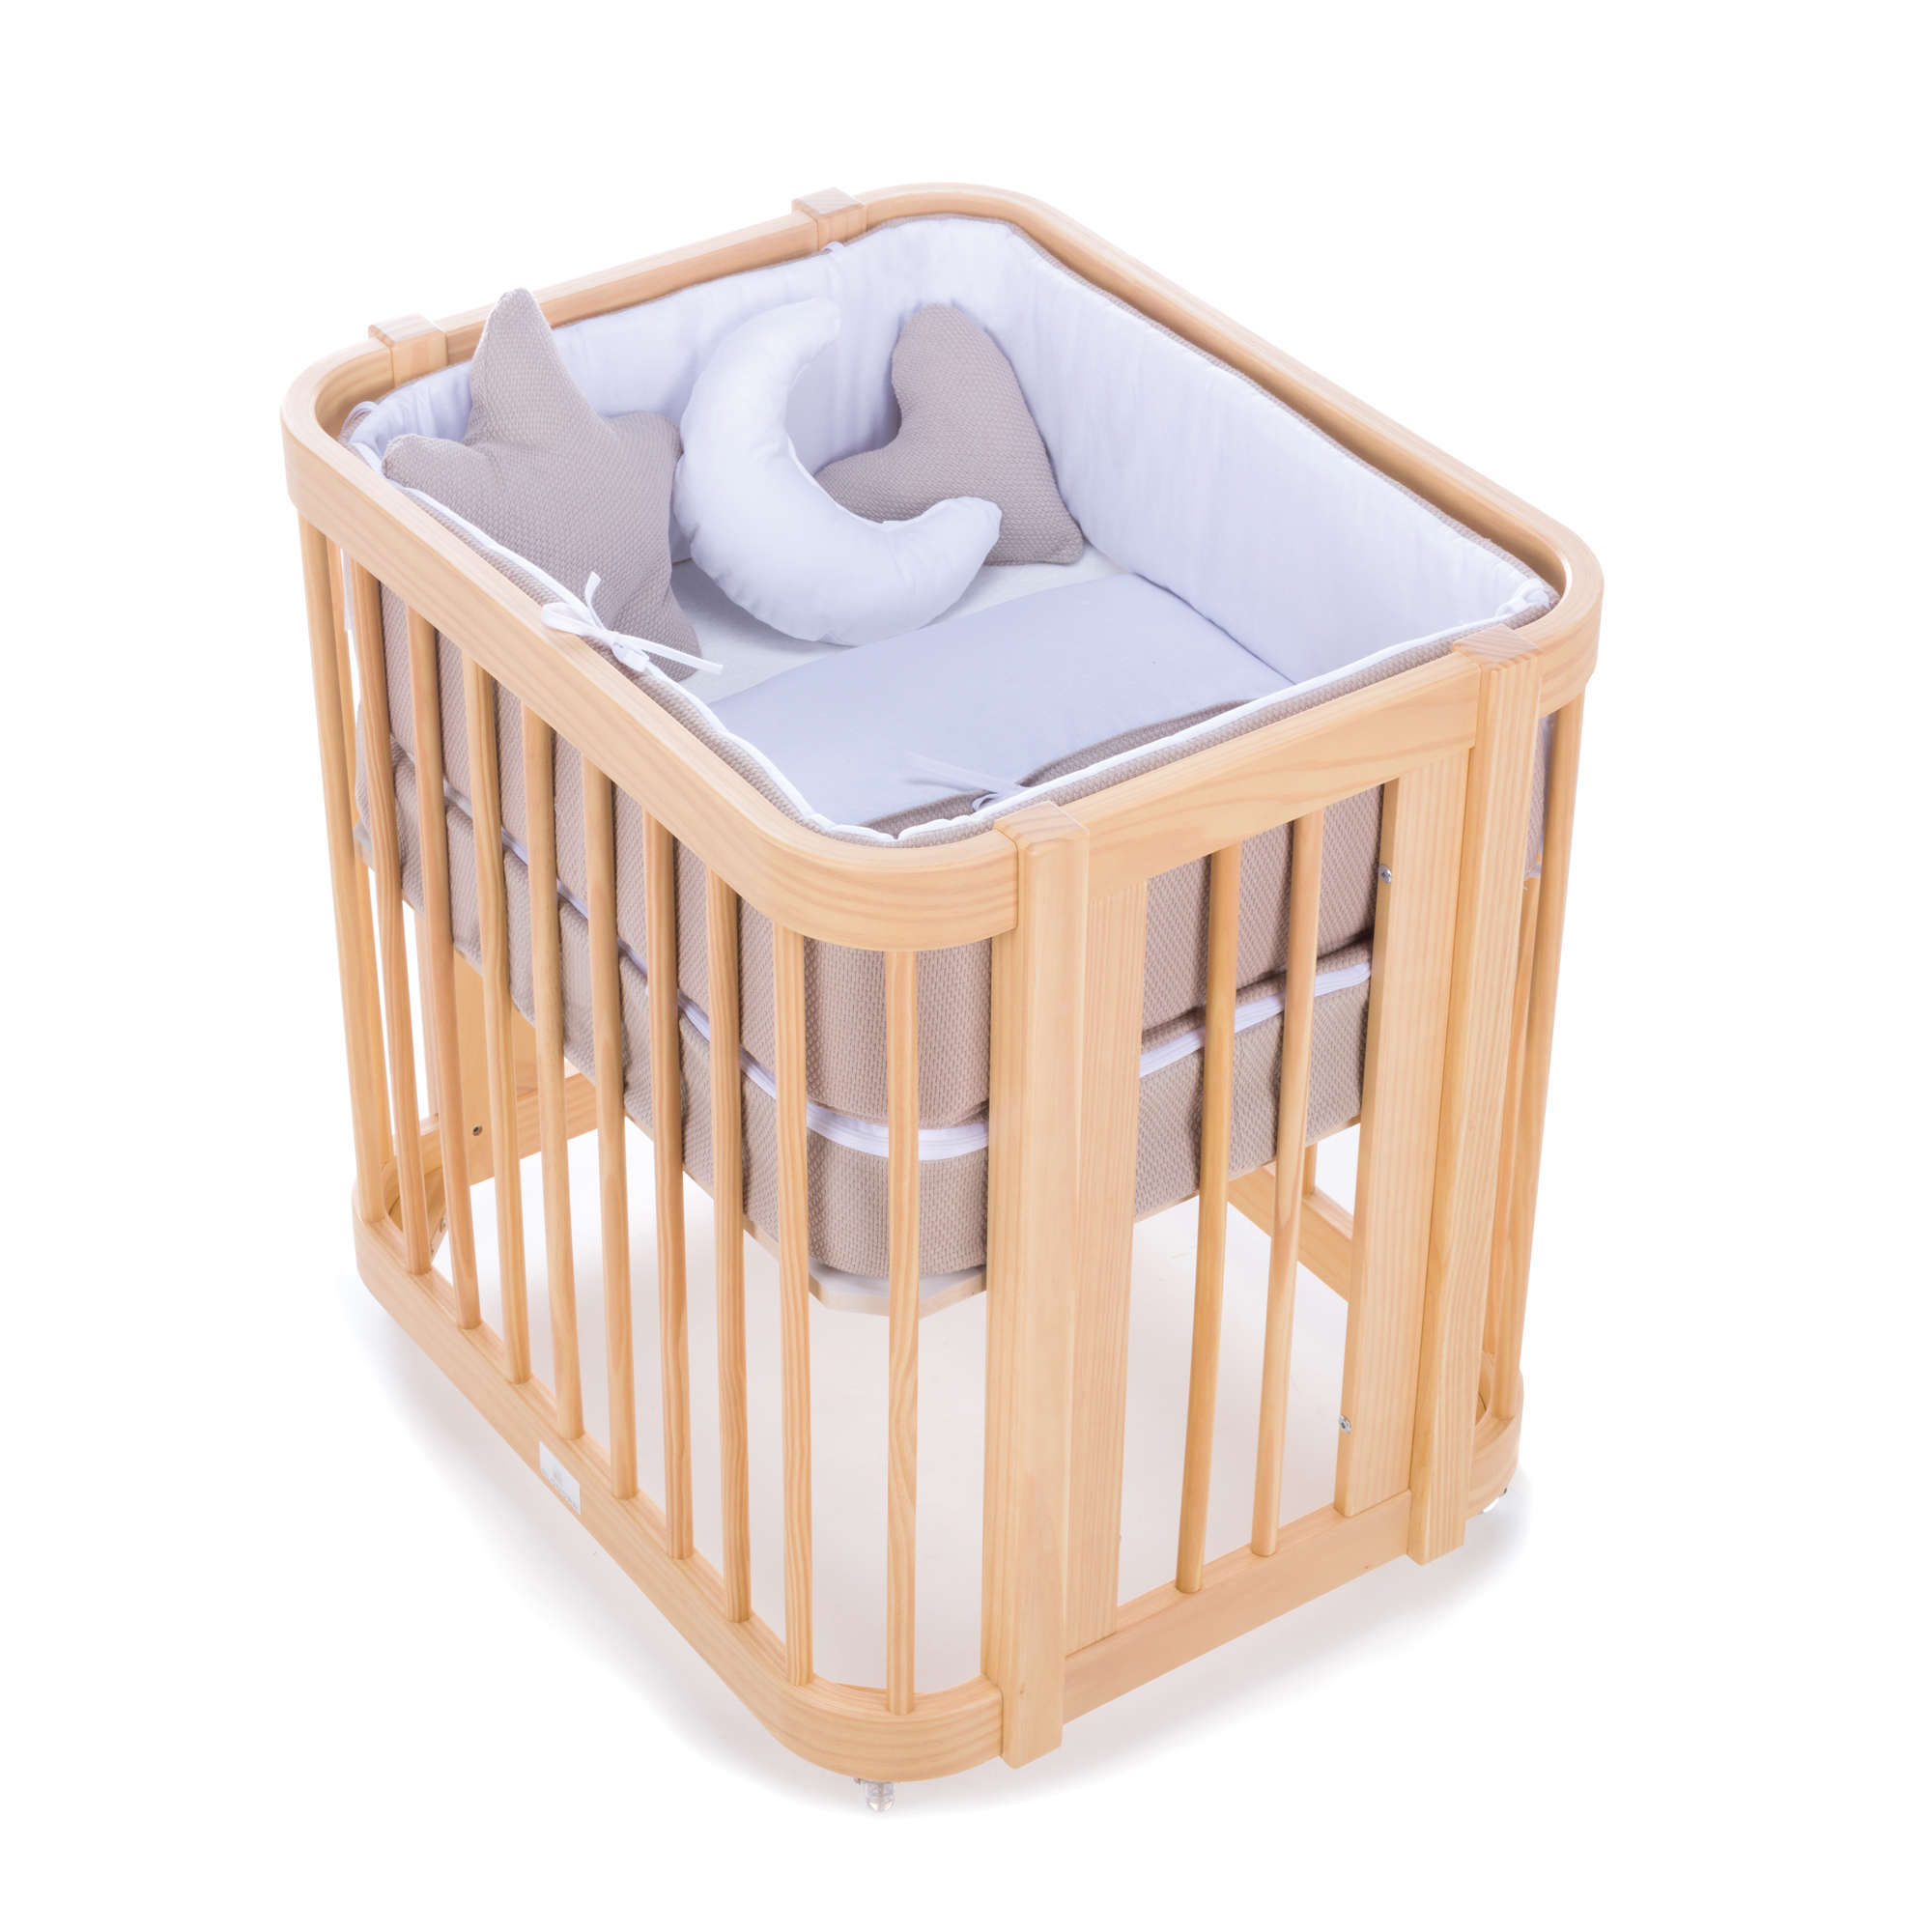 All-in-one cribs-cots